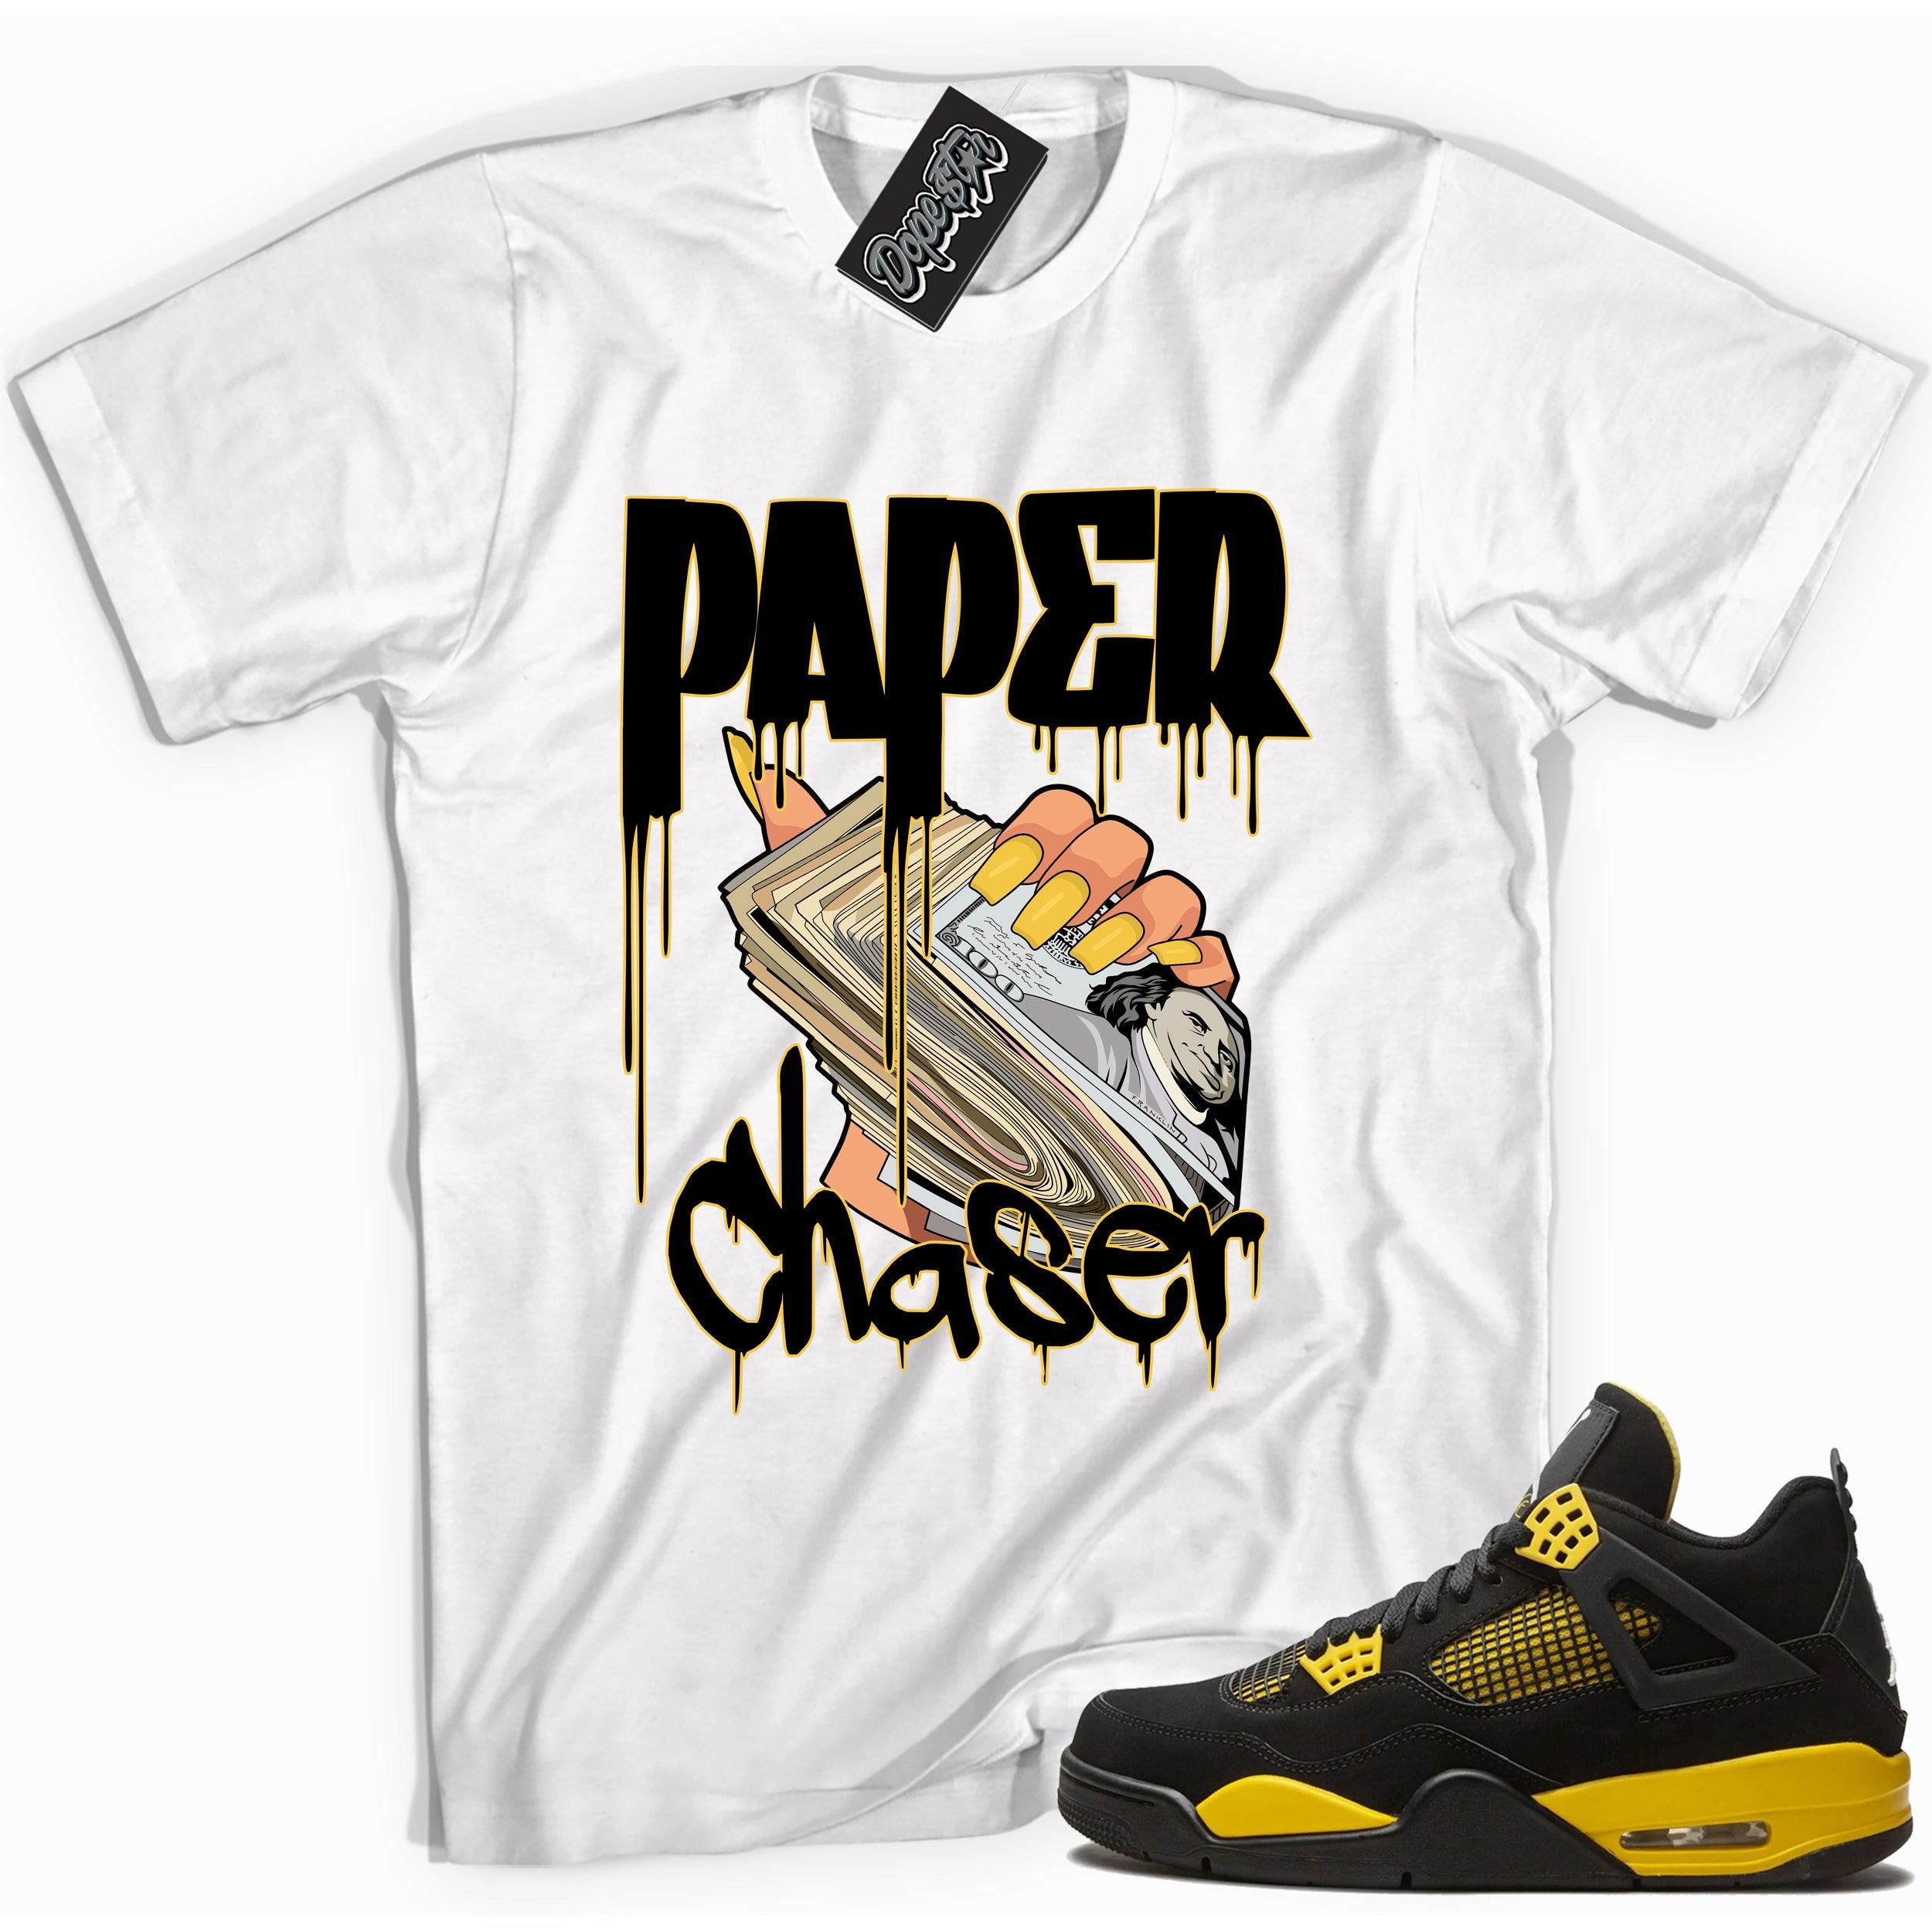 Cool white graphic tee with 'paper chaser' print, that perfectly matches Air Jordan 4 Thunder sneakers